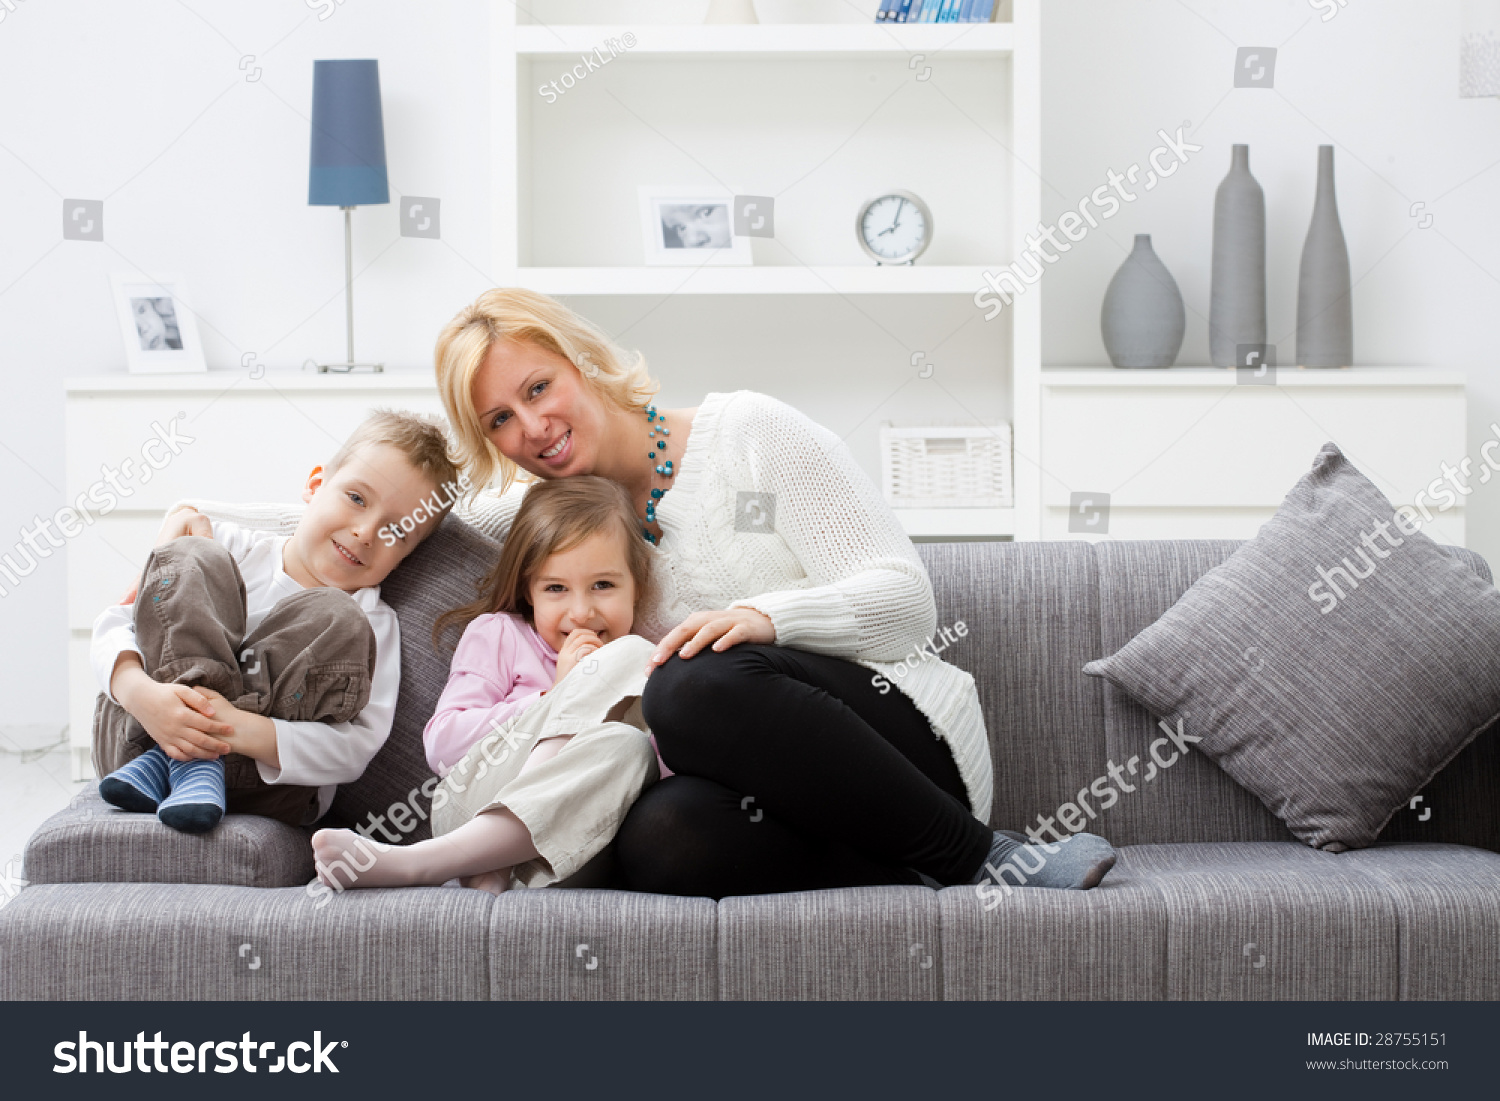 Mother and children sitting together on couch at living room. #28755151